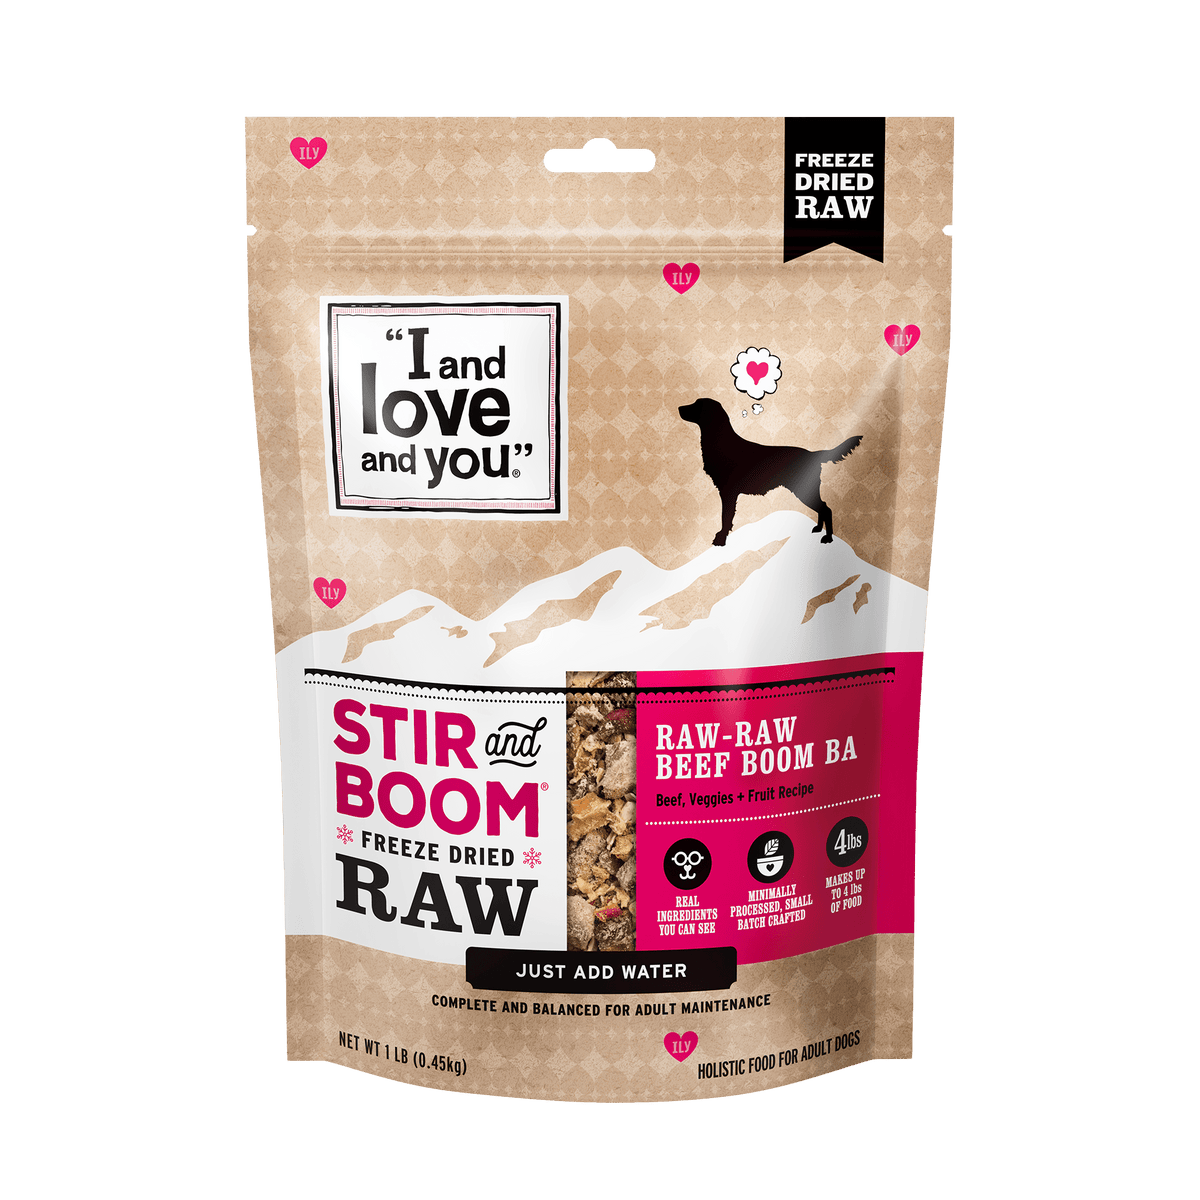 Stir & Boom - Raw Raw Beef Boom Ba: A bag of dehydrated dog food with real ingredients like beef hearts, sweet potatoes, and cranberries.